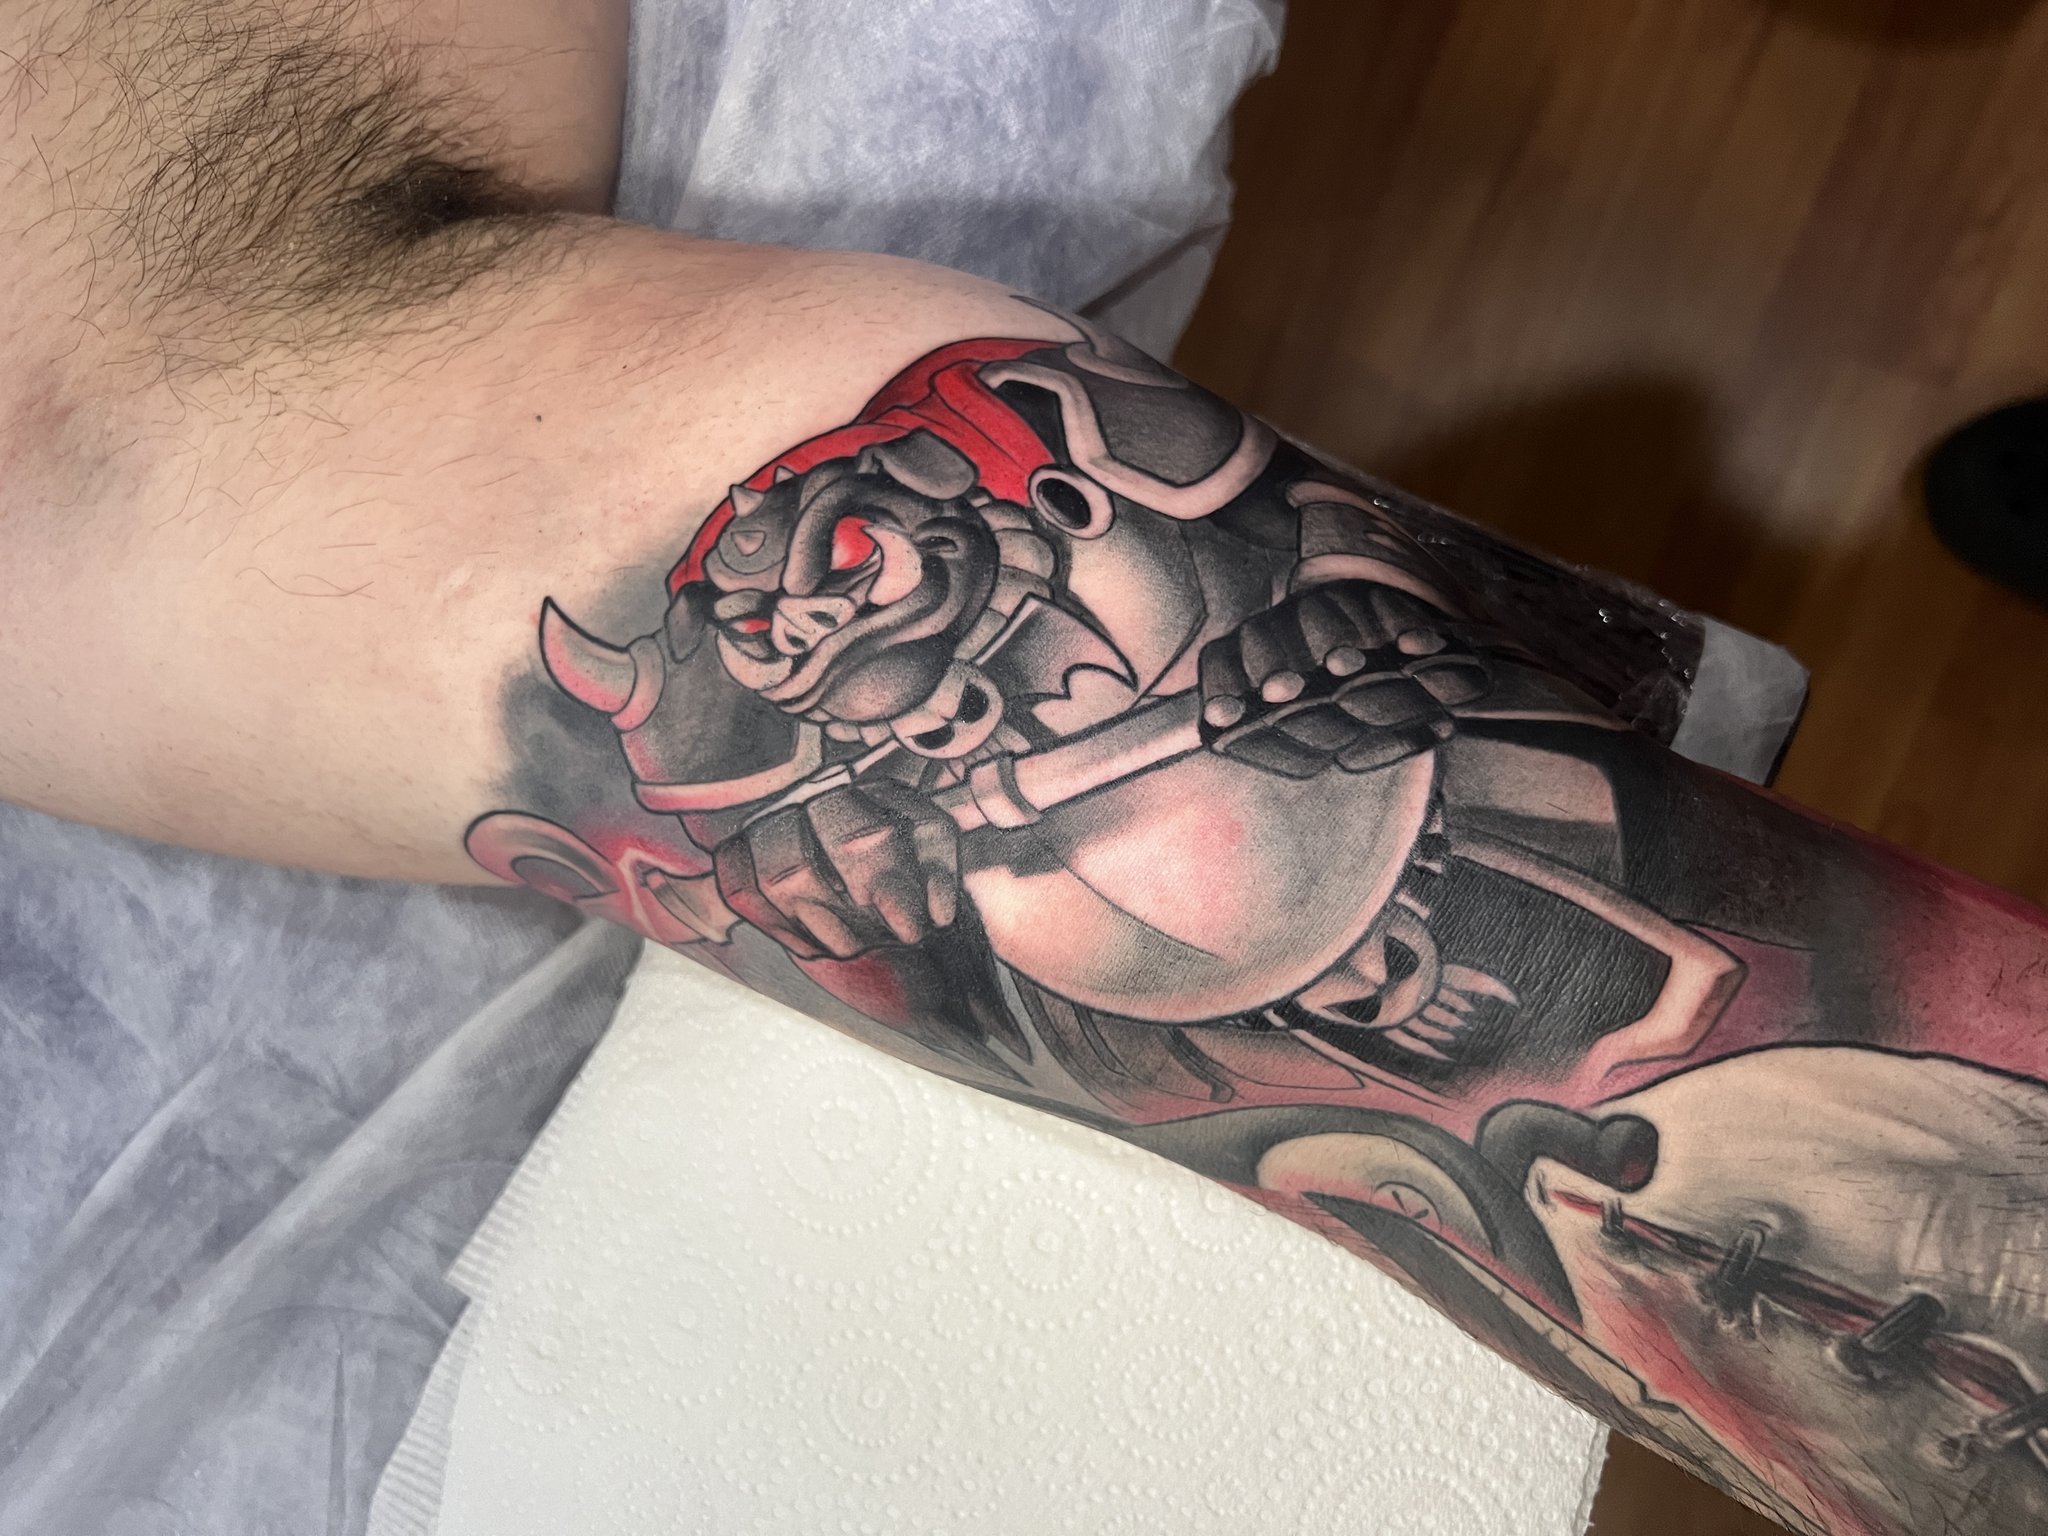 CinnamonToastKen on Twitter Any recommendations for tattoo artists in  Melbourne Feeling inspired to start planning out the other sleeve Bad  guys in black grey shading Similar style as the other  Twitter